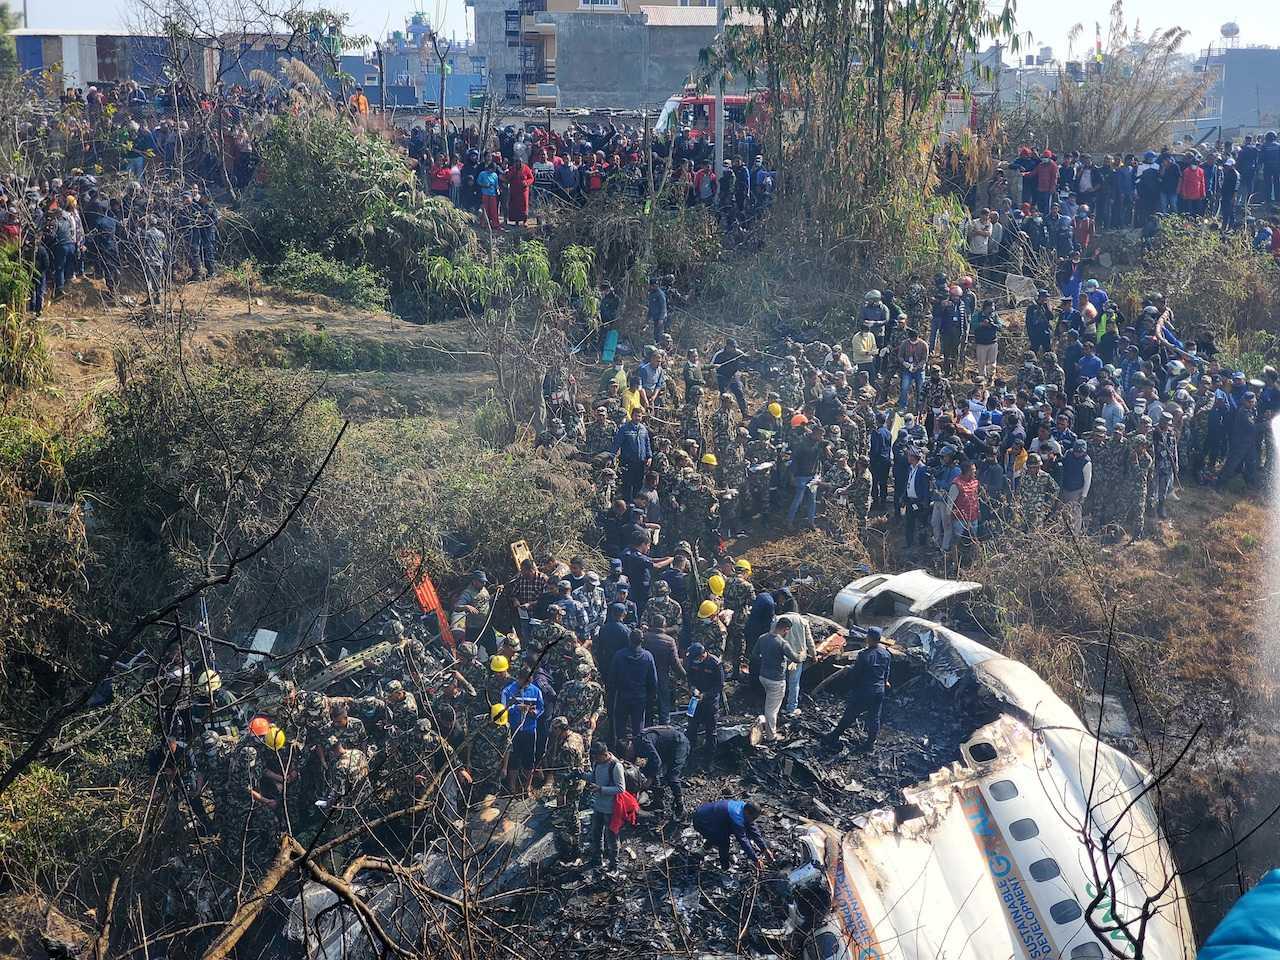 A general view of people gathered after a plane crash in Pokhara, Nepal, Jan 15, in this picture obtained from social media. Photo: Reuters